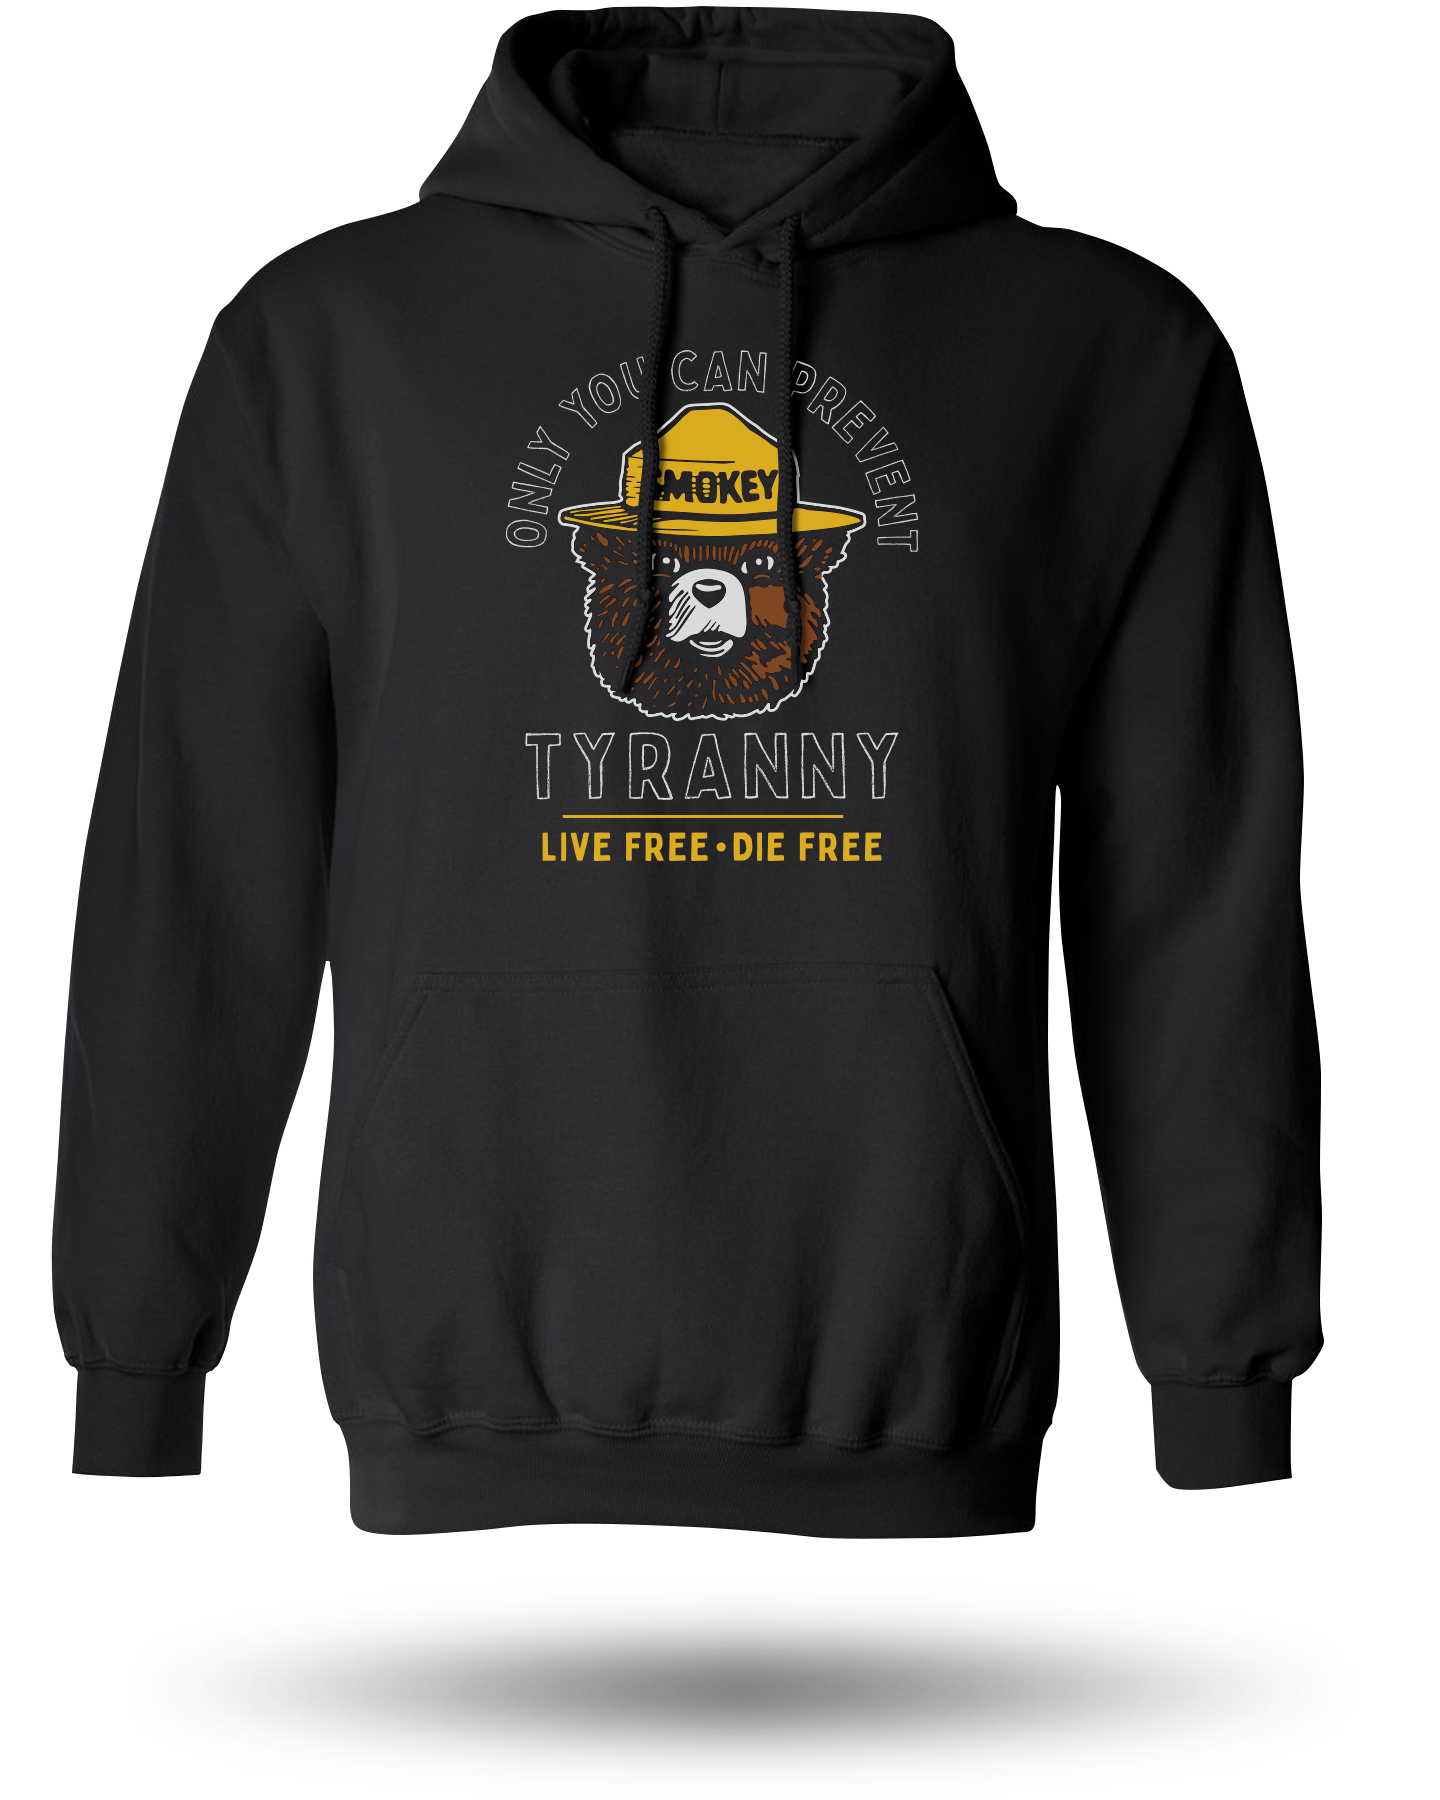 ONLY YOU CAN PREVENT TYRANNY HOODIE